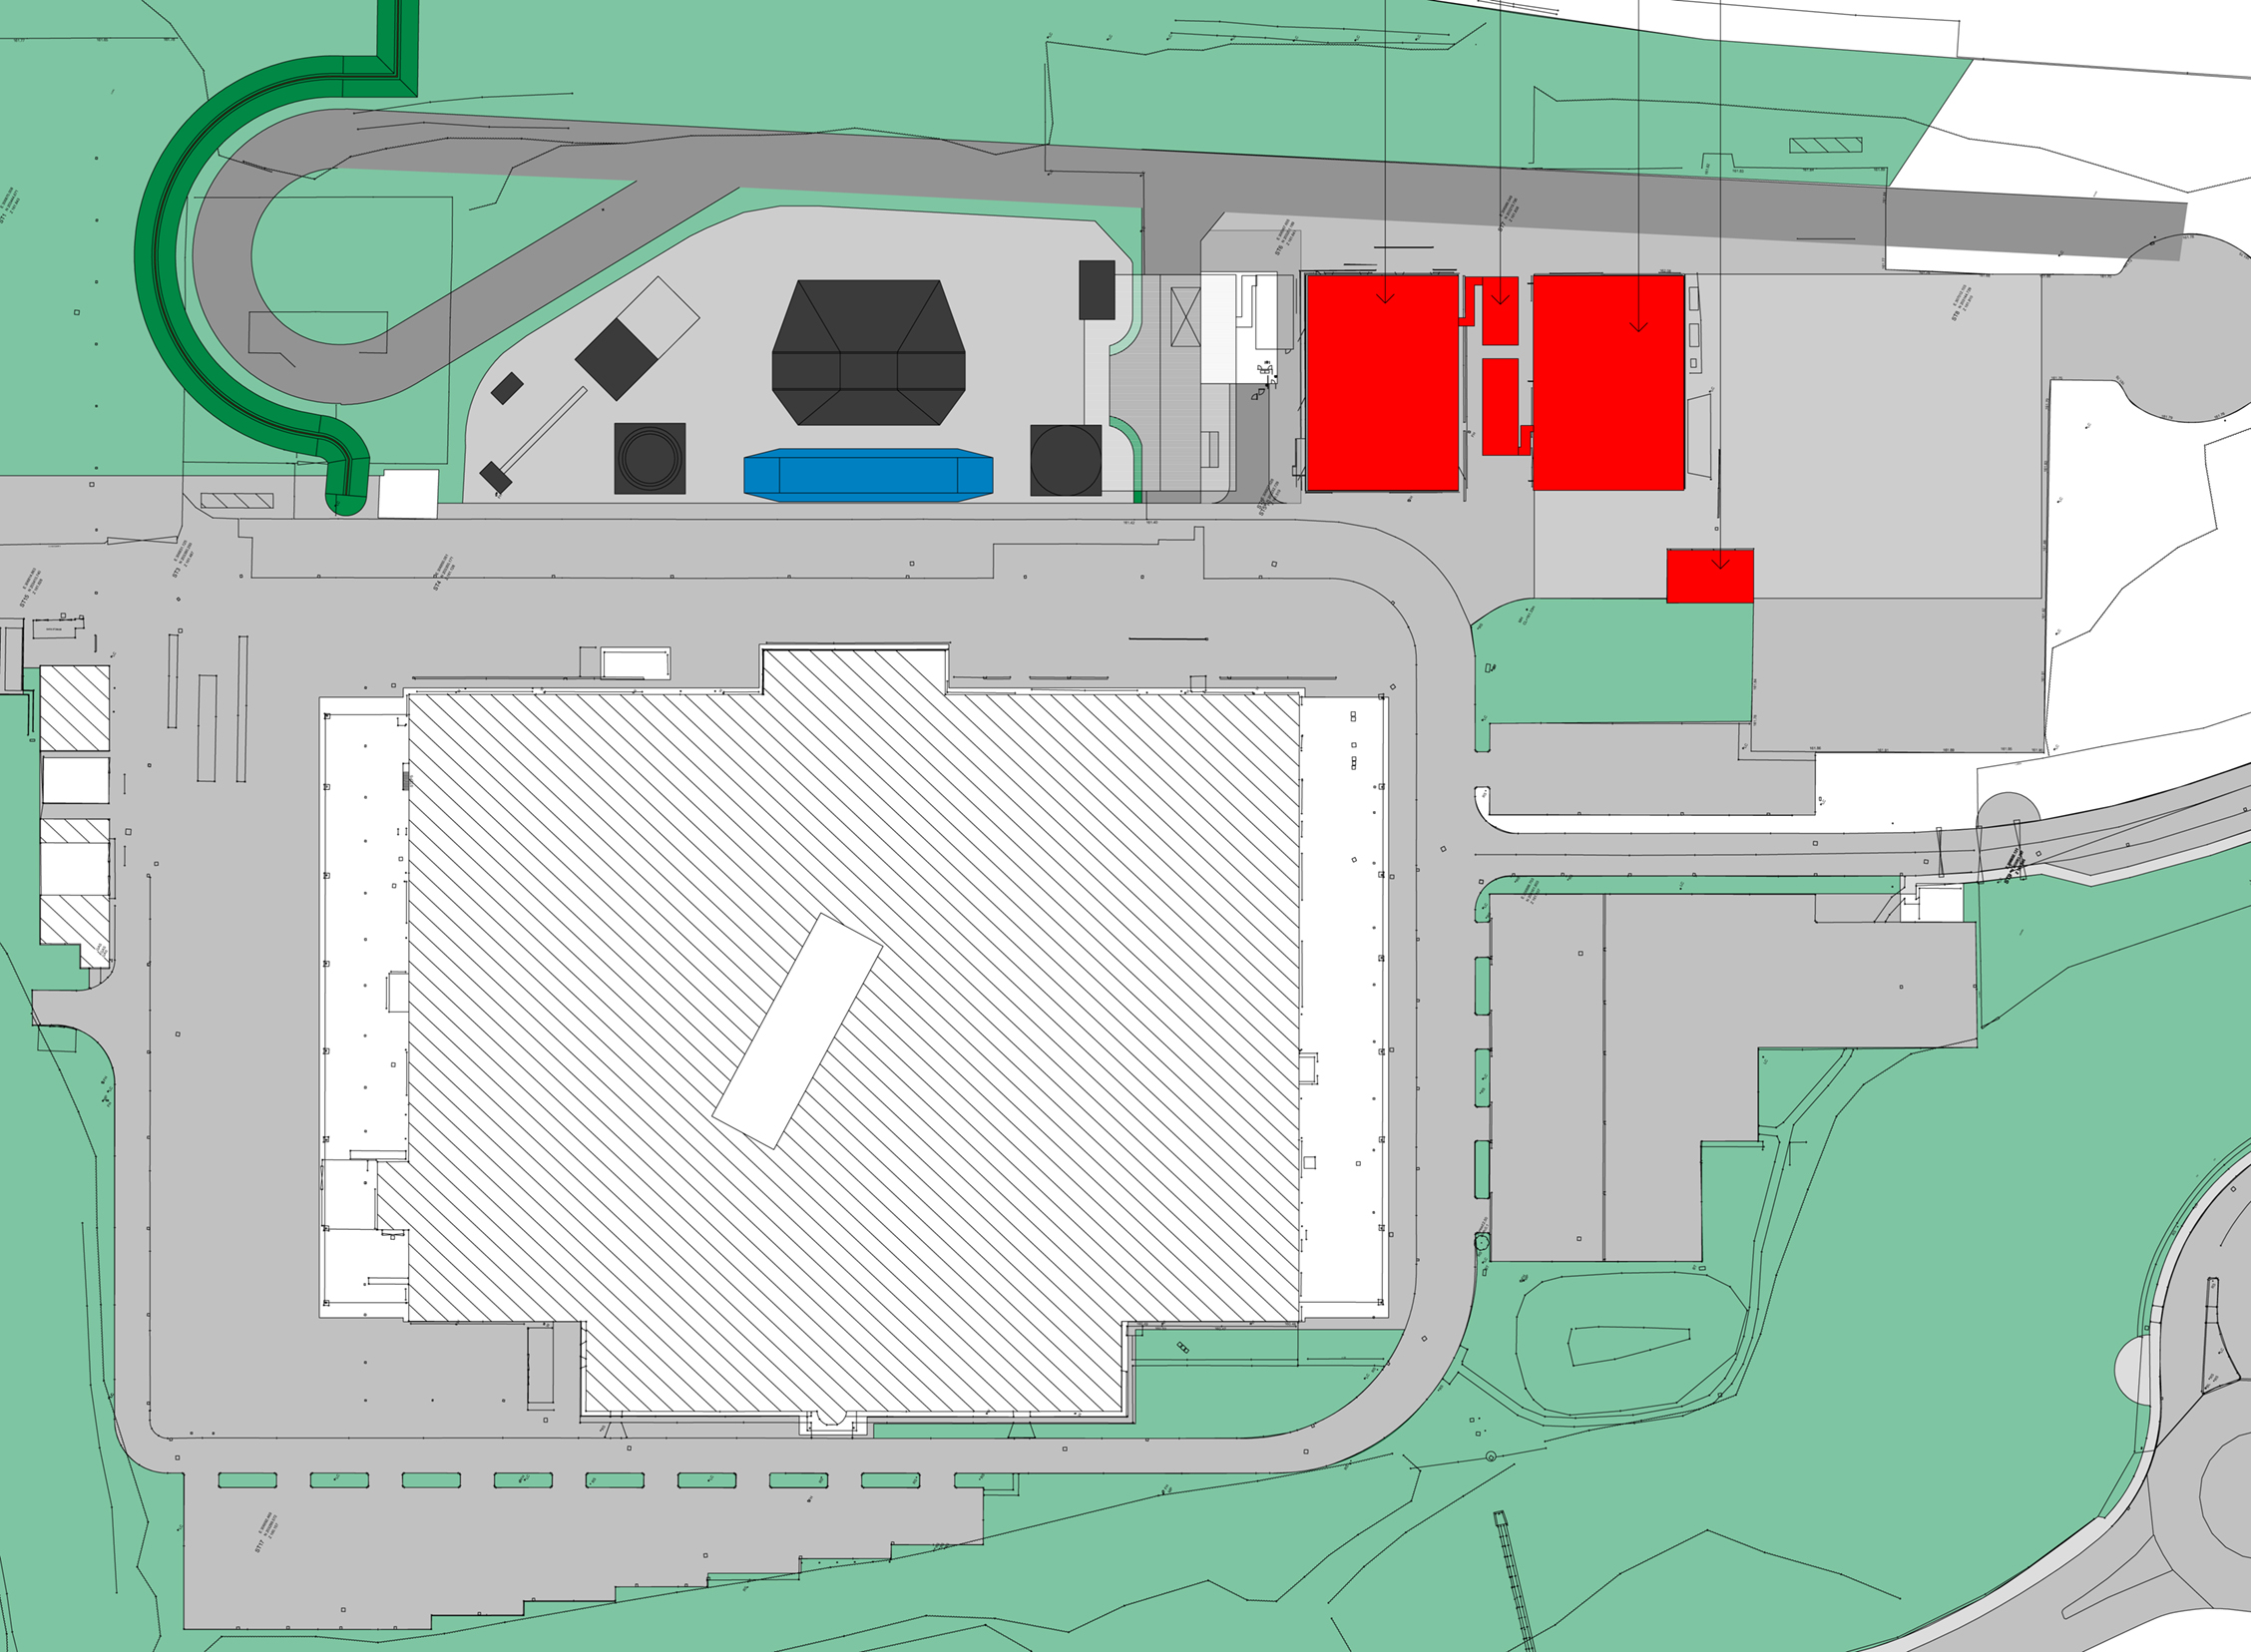 Assembly Facility for General Dynamics, Merthyr Tydfil, Wales - Site Plan